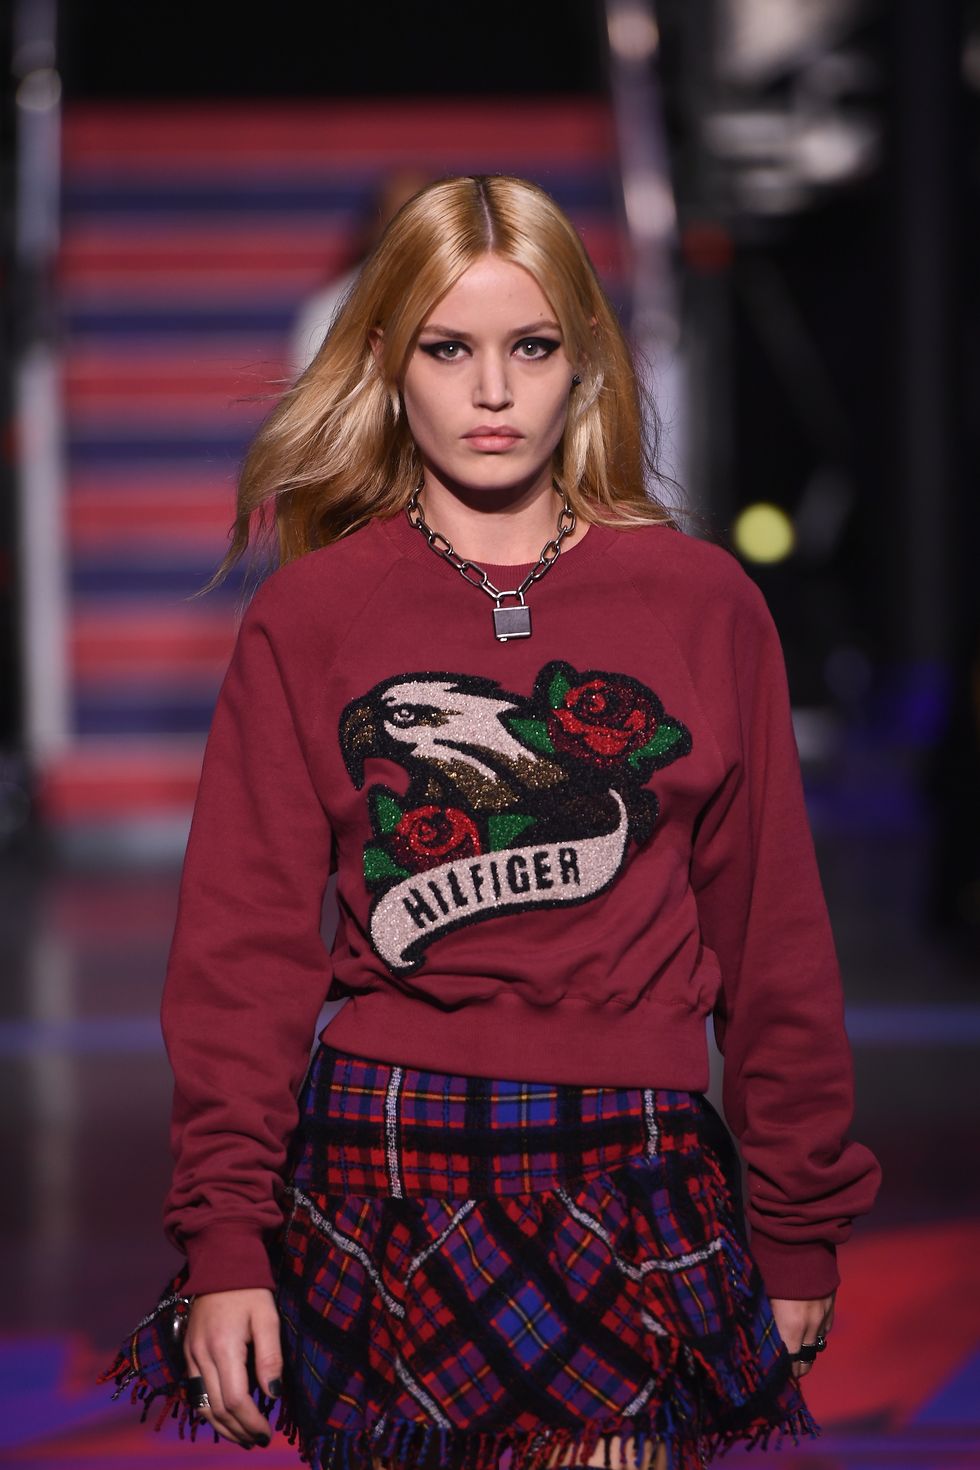 LONDON, ENGLAND - SEPTEMBER 19:  A model walks the runway at the Tommy Hilfiger TOMMYNOW Fall 2017 Show during London Fashion Week September 2017 at the Roundhouse on September 19, 2017 in London, England.  (Photo by Ian Gavan/Getty Images for Tommy Hilfiger)